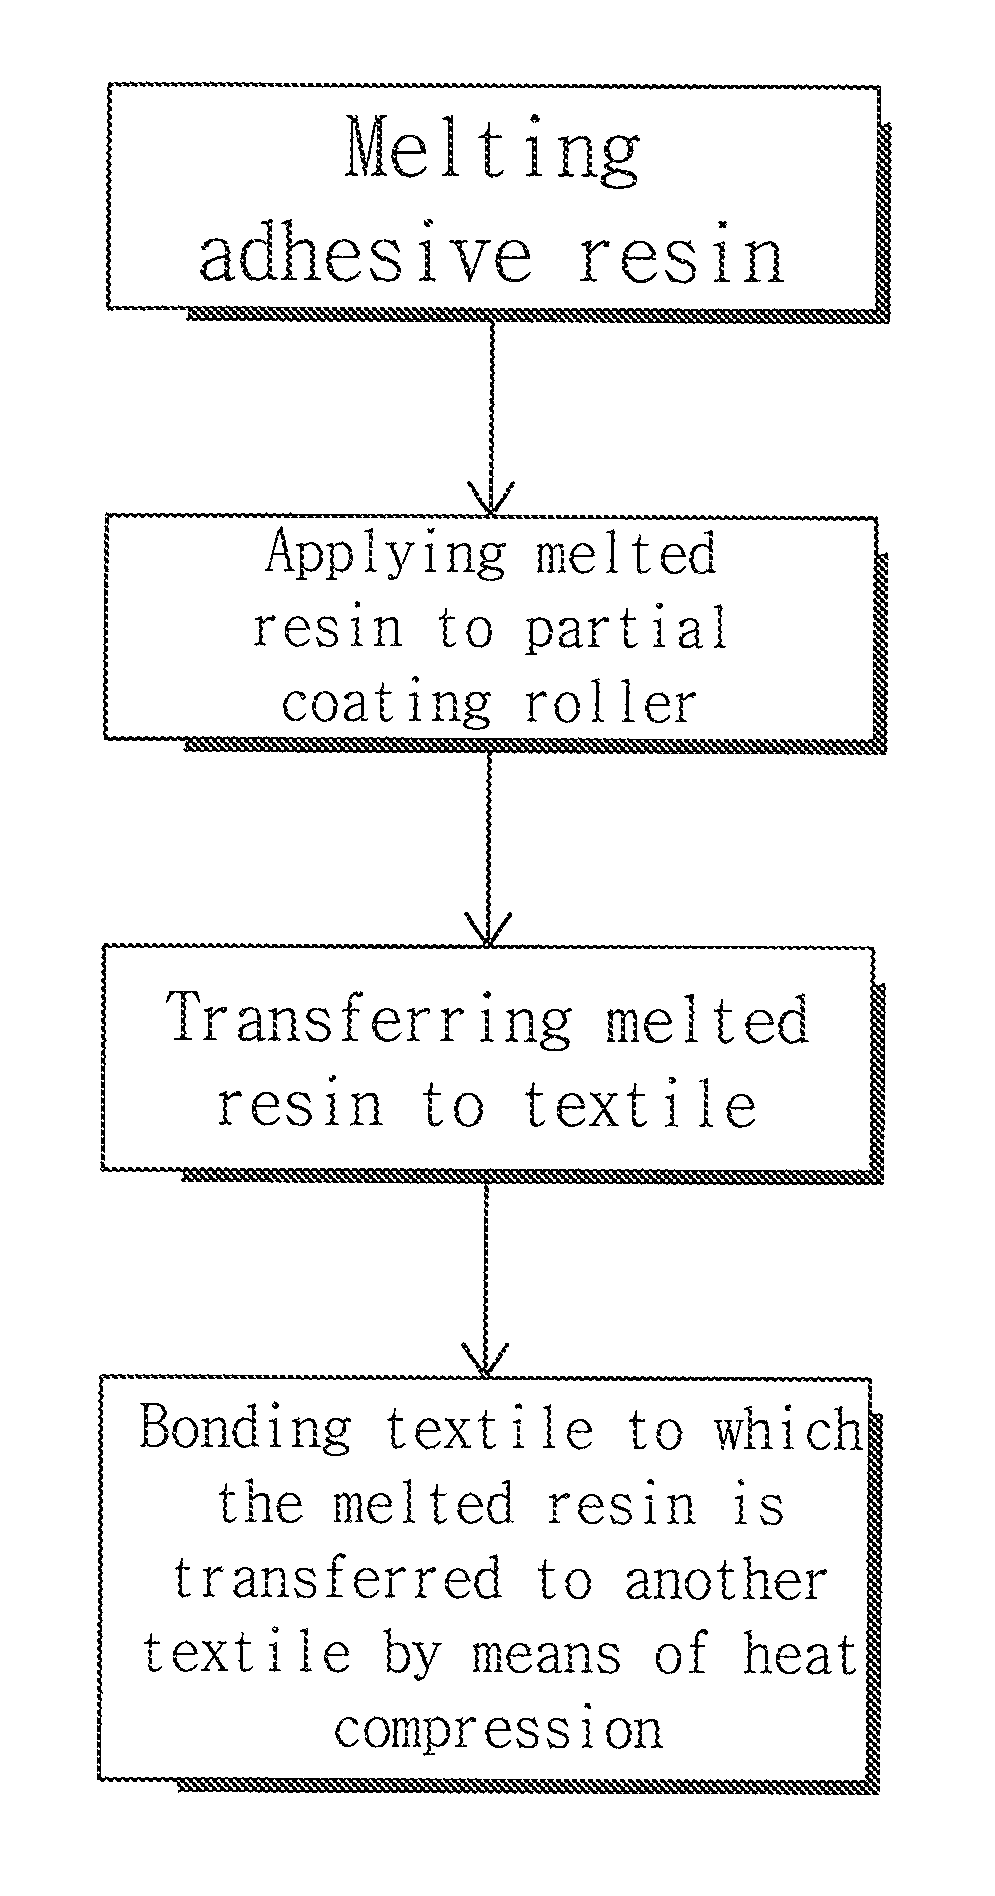 Method for bonding fabric or sheet-type industrial materials to each other